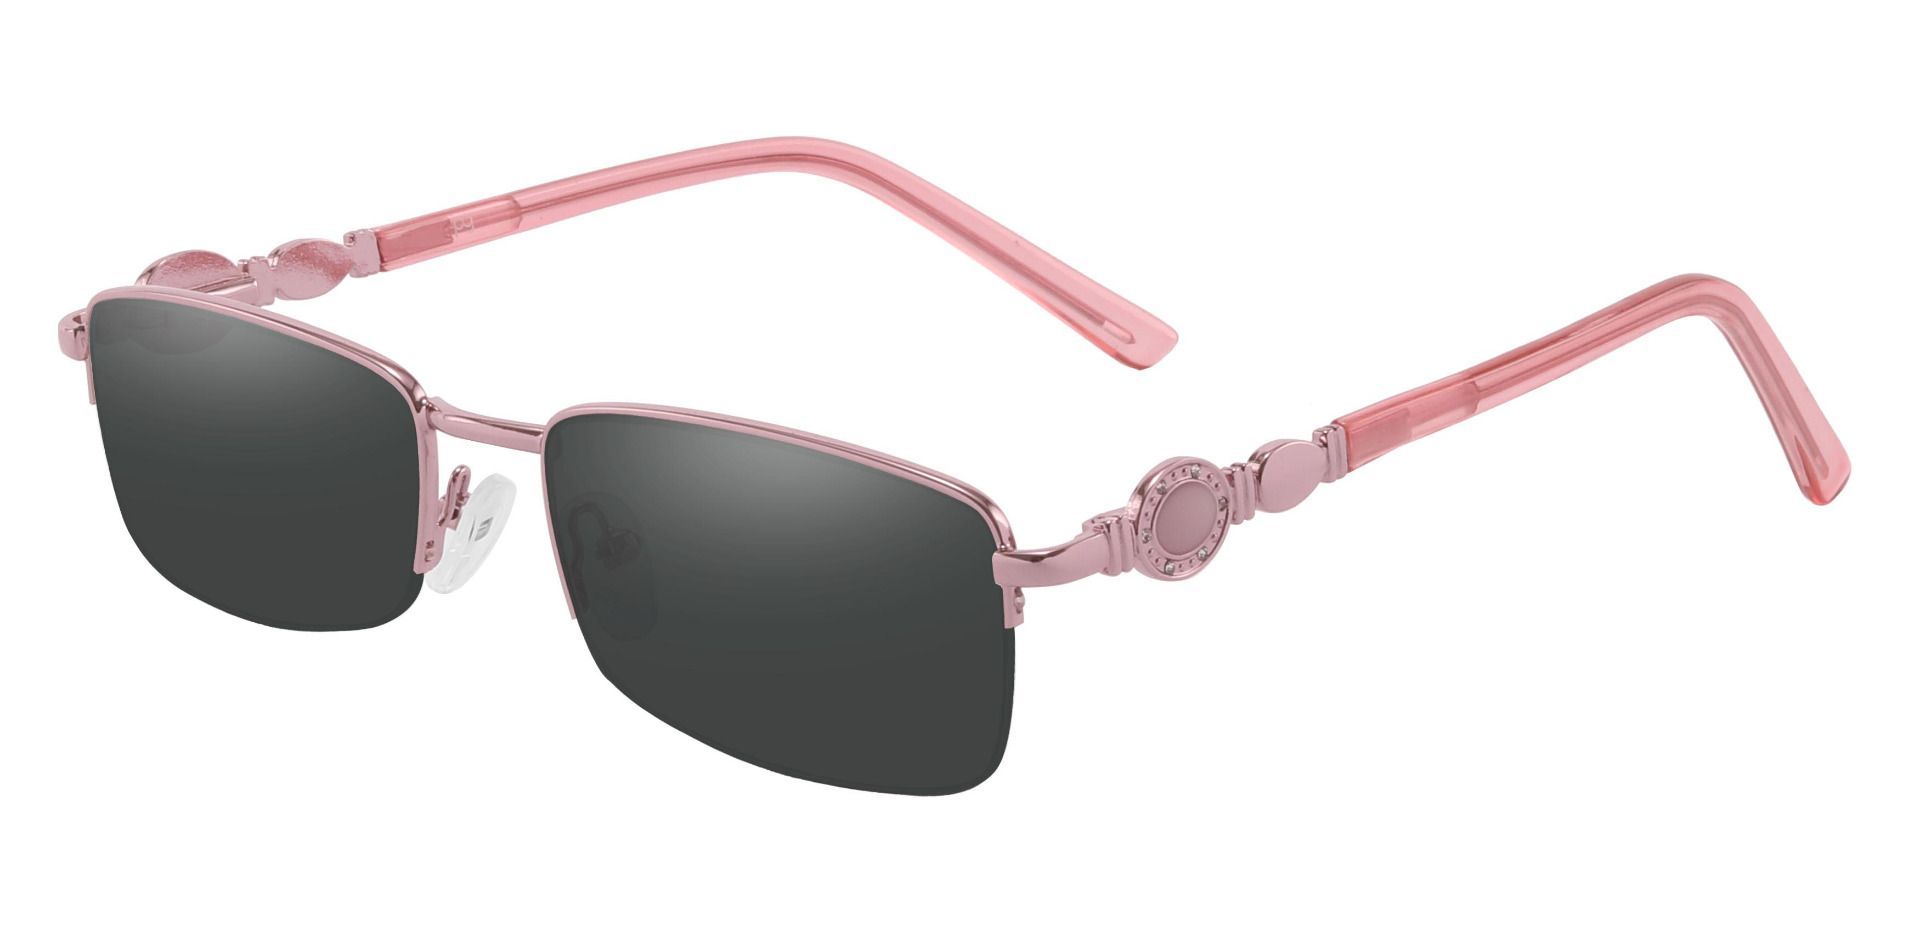 Crowley Rectangle Lined Bifocal Sunglasses - Pink Frame With Gray Lenses